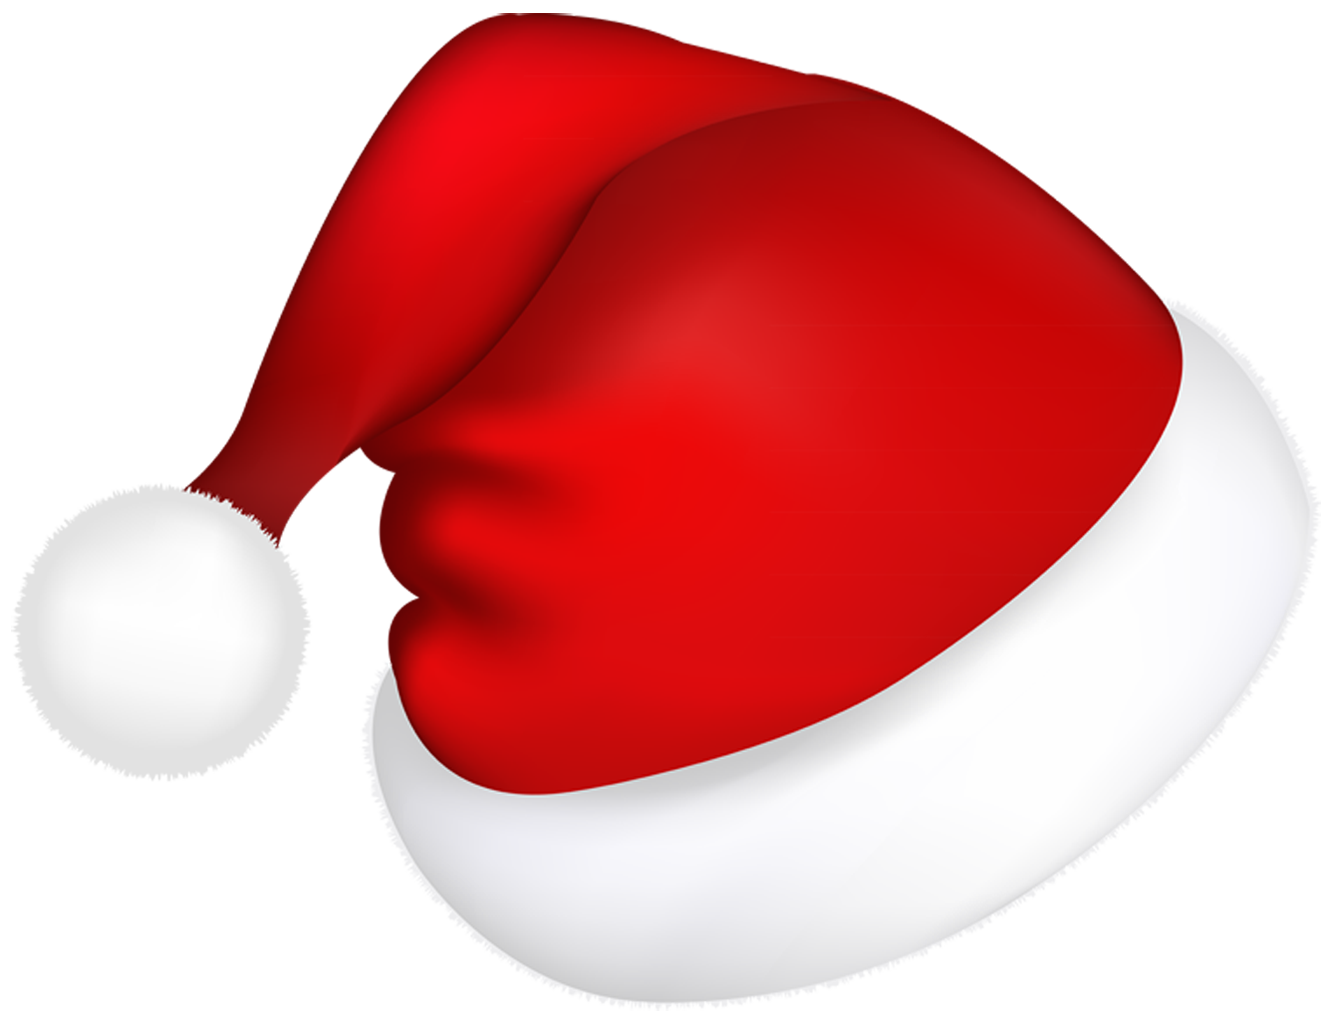 Large Red Santa Hat PNG Picture | Gallery Yopriceville ...
